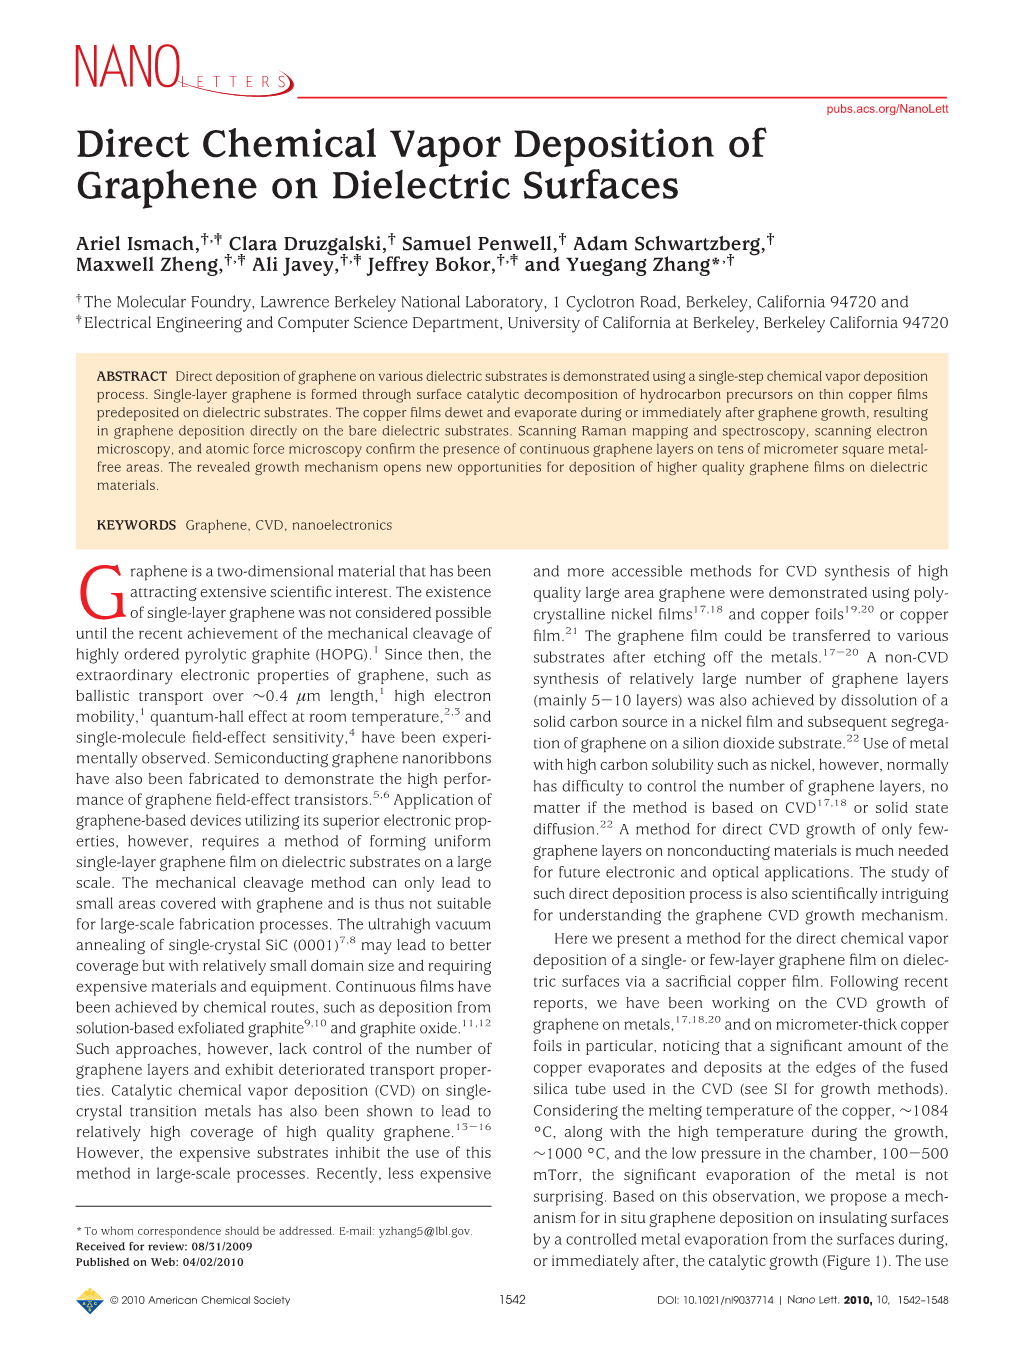 Direct Chemical Vapor Deposition of Graphene on Dielectric Surfaces